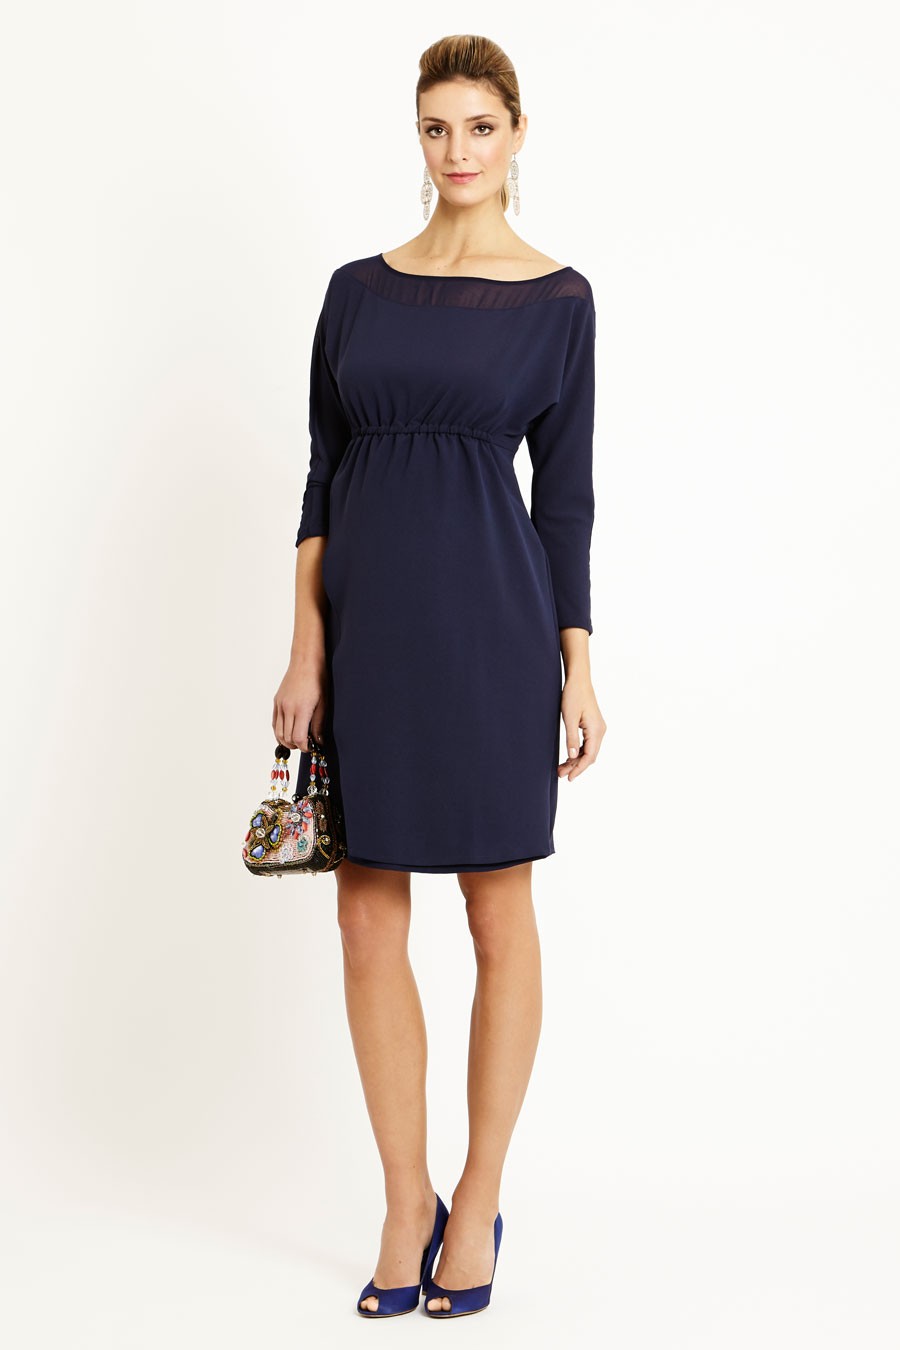 Verbier empire line maternity dress with scoop neck.